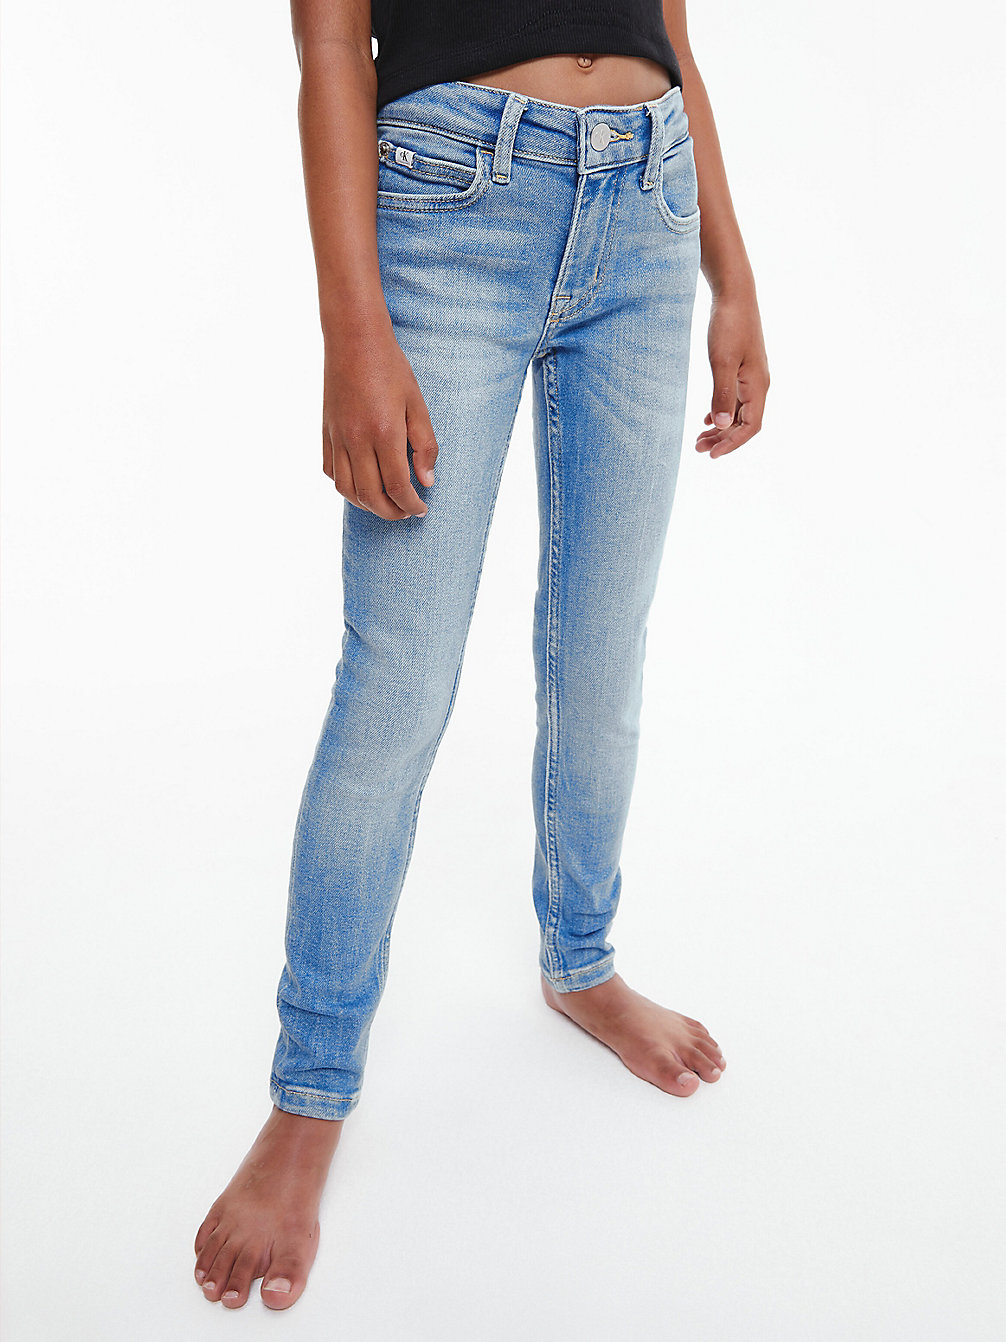 Mid Rise Skinny Jeans > MID BLUE > undefined girls > Calvin Klein